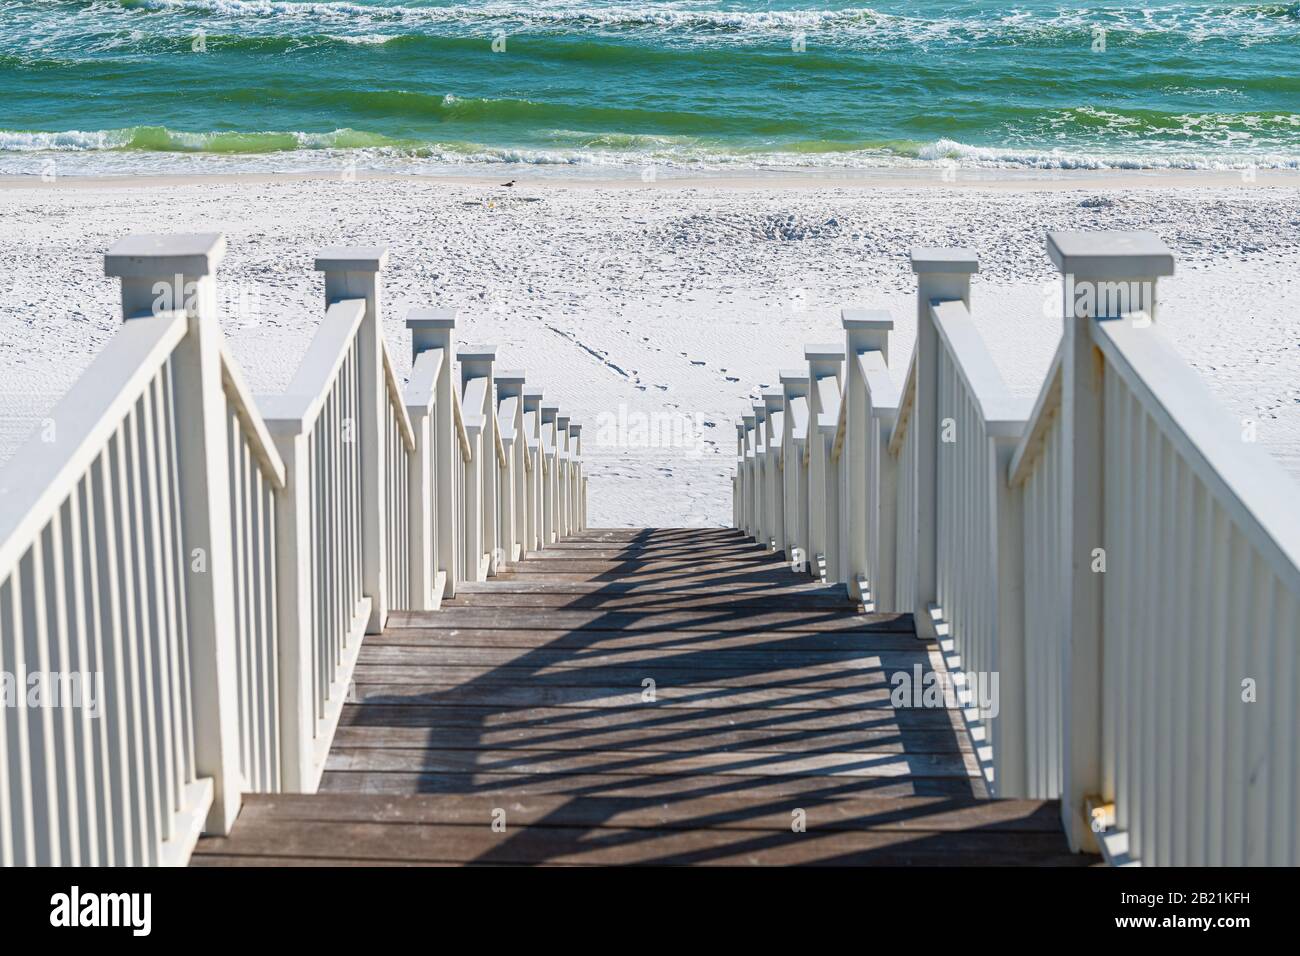 Seaside, Florida railing wooden stairway walkway steps looking down view of architecture by beach ocean background view down during sunny day Stock Photo